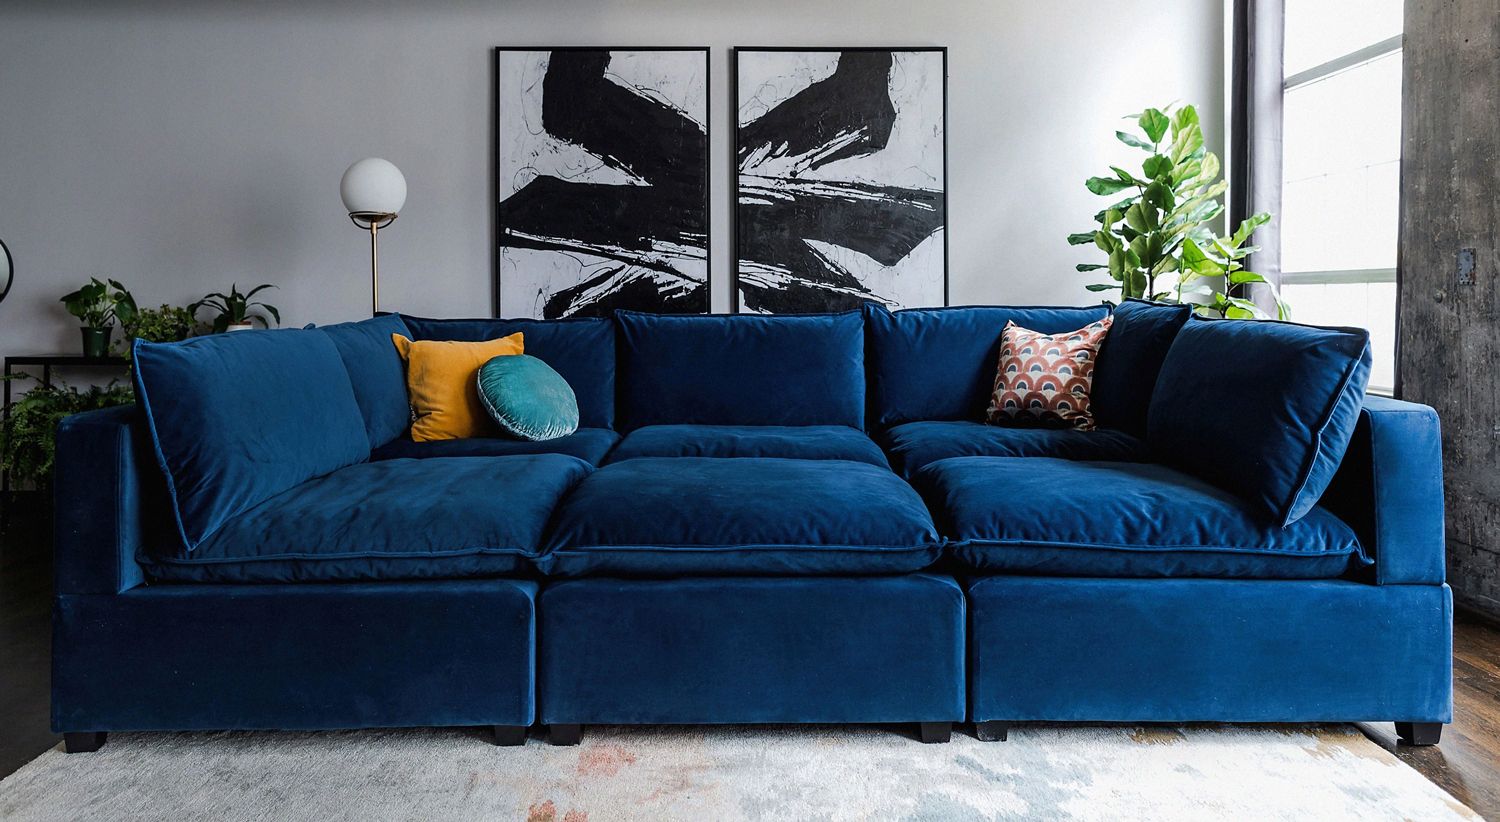 15 Best Deep Sectional Sofas for Ultimate Lounging - VIV & TIM